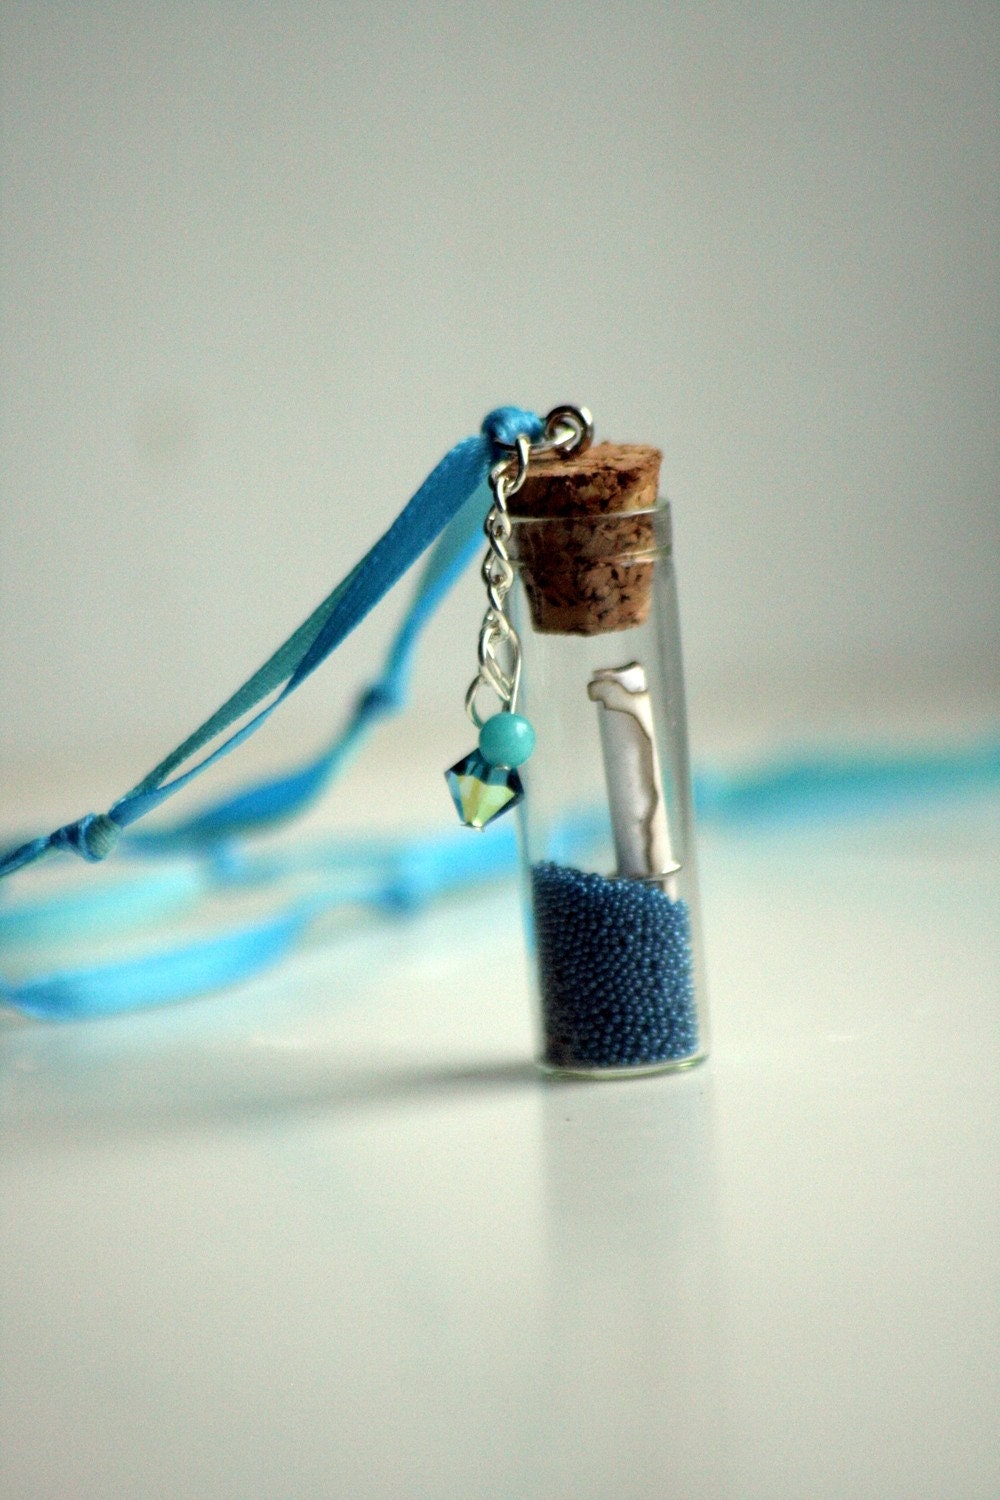 Message in a Bottle,Pirate, Mermaid Pearls/Bubbles, Pixie Dust Necklaces, Map